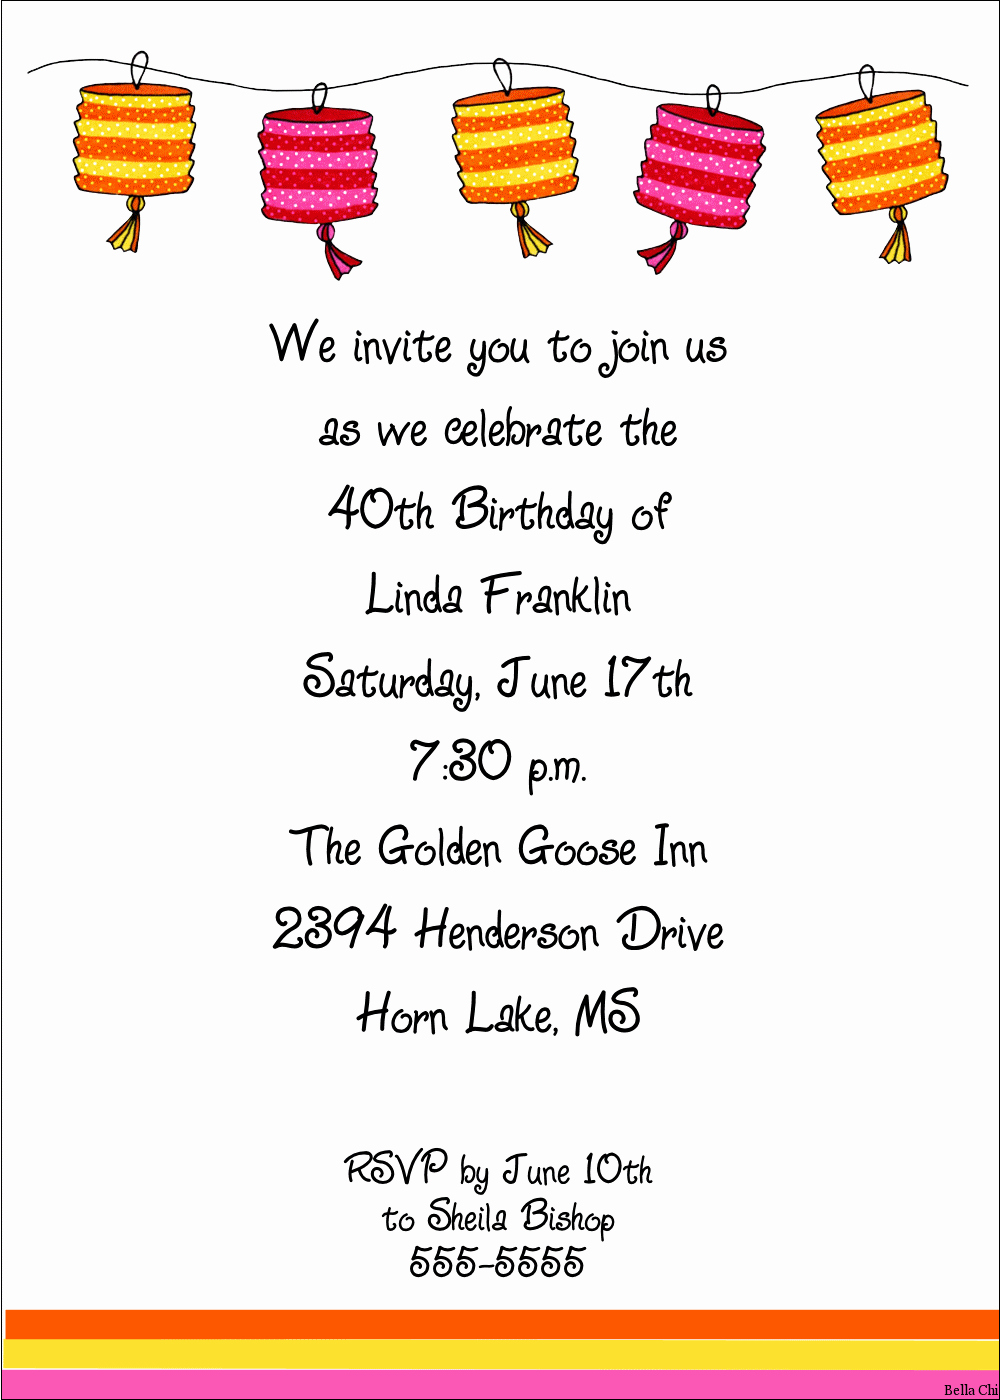 Invitation Message for Party Elegant Invitations for Birthday Party for Adults